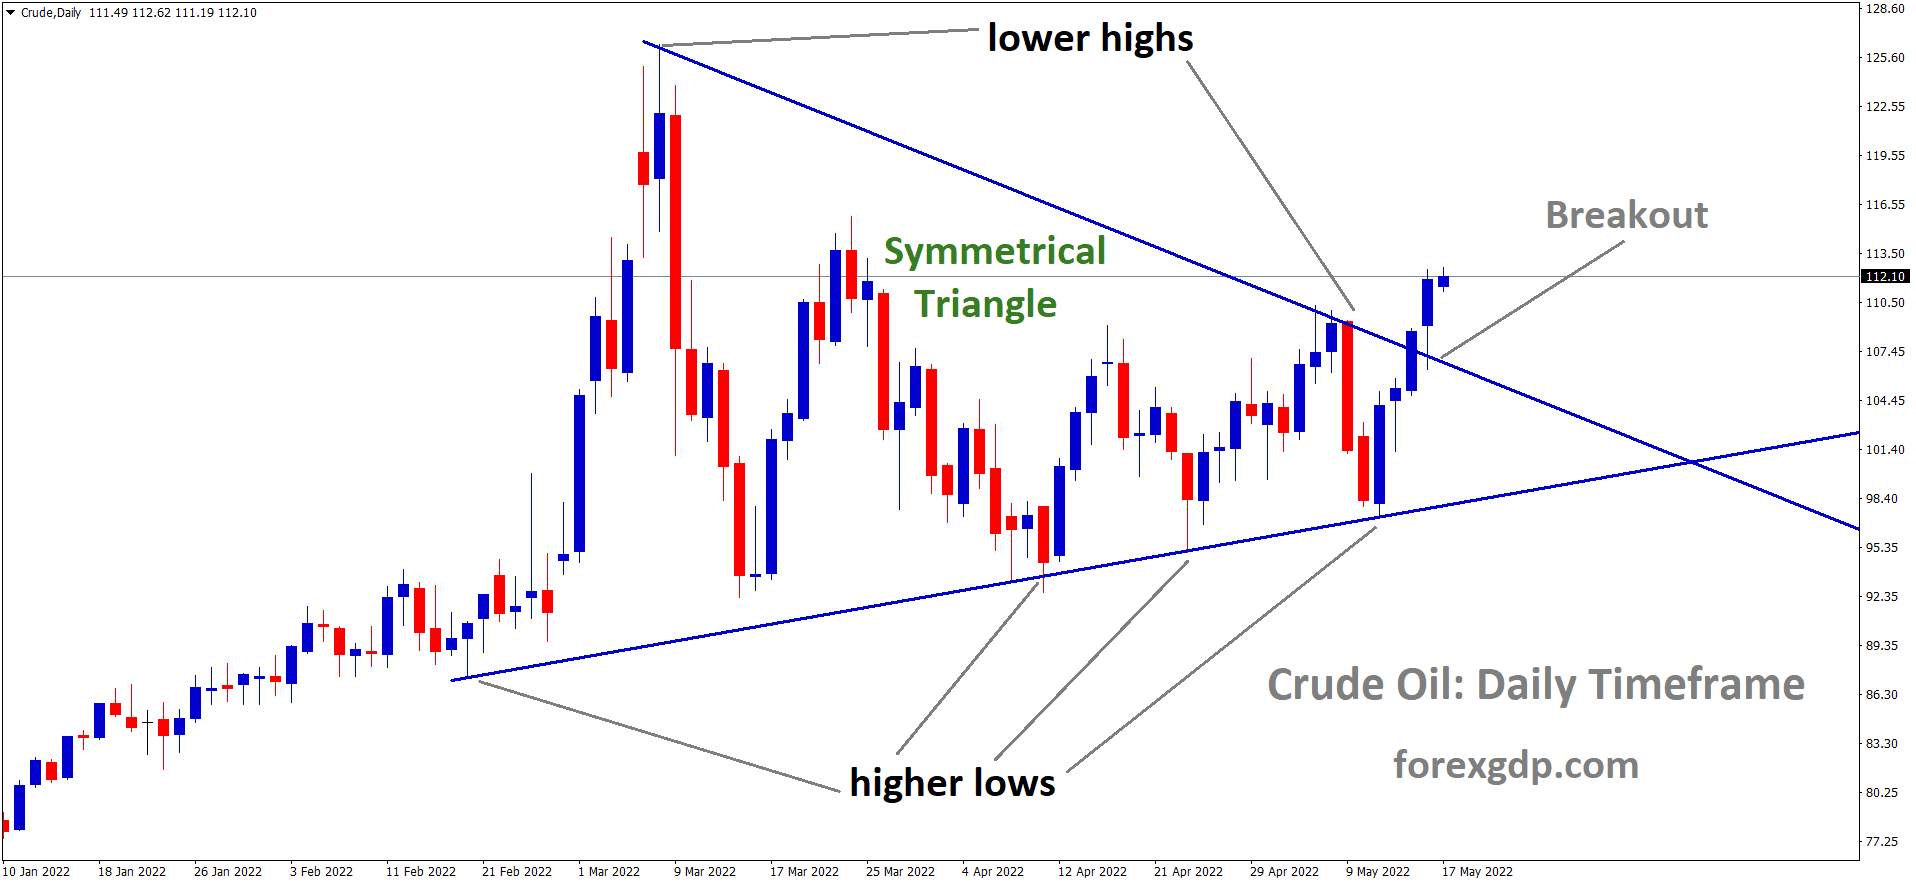 Crude Oil Daily Time Frame Analysis Market has broken the Symmetrical triangle pattern